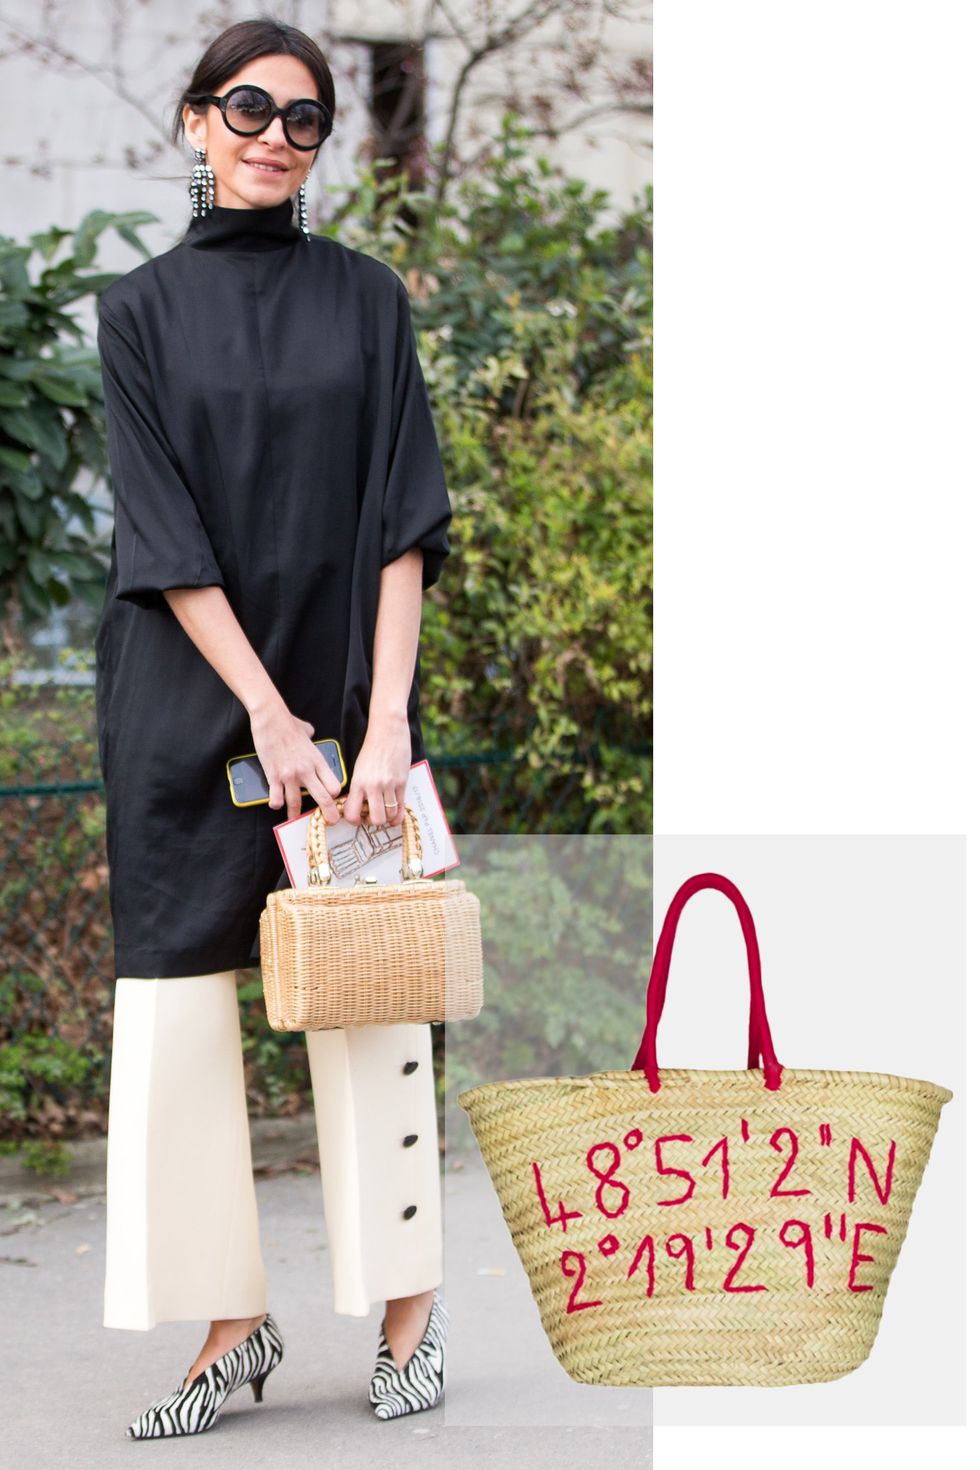 <p>"So many cool girls are <a href="http://www.elle.com/fashion/g28707/basket-bag-trends/" target="_blank" data-tracking-id="recirc-text-link">carrying a basket bag</a> á la Jane Birkin this season," according to Paris-based journalist Lauren Bastide. "It was something you usually witnessed only during summertime, but now they're wearing wearing them in winter, too. That's the way Jane wore it—rain or shine."
</p>

<p><em data-redactor-tag="em">Kilometre GPS Bag, $85; </em><a href="https://kilometre.paris/collection/gps-basket/" target="_blank" data-tracking-id="recirc-text-link"><em data-redactor-tag="em">kilometre.paris</em></a></p>